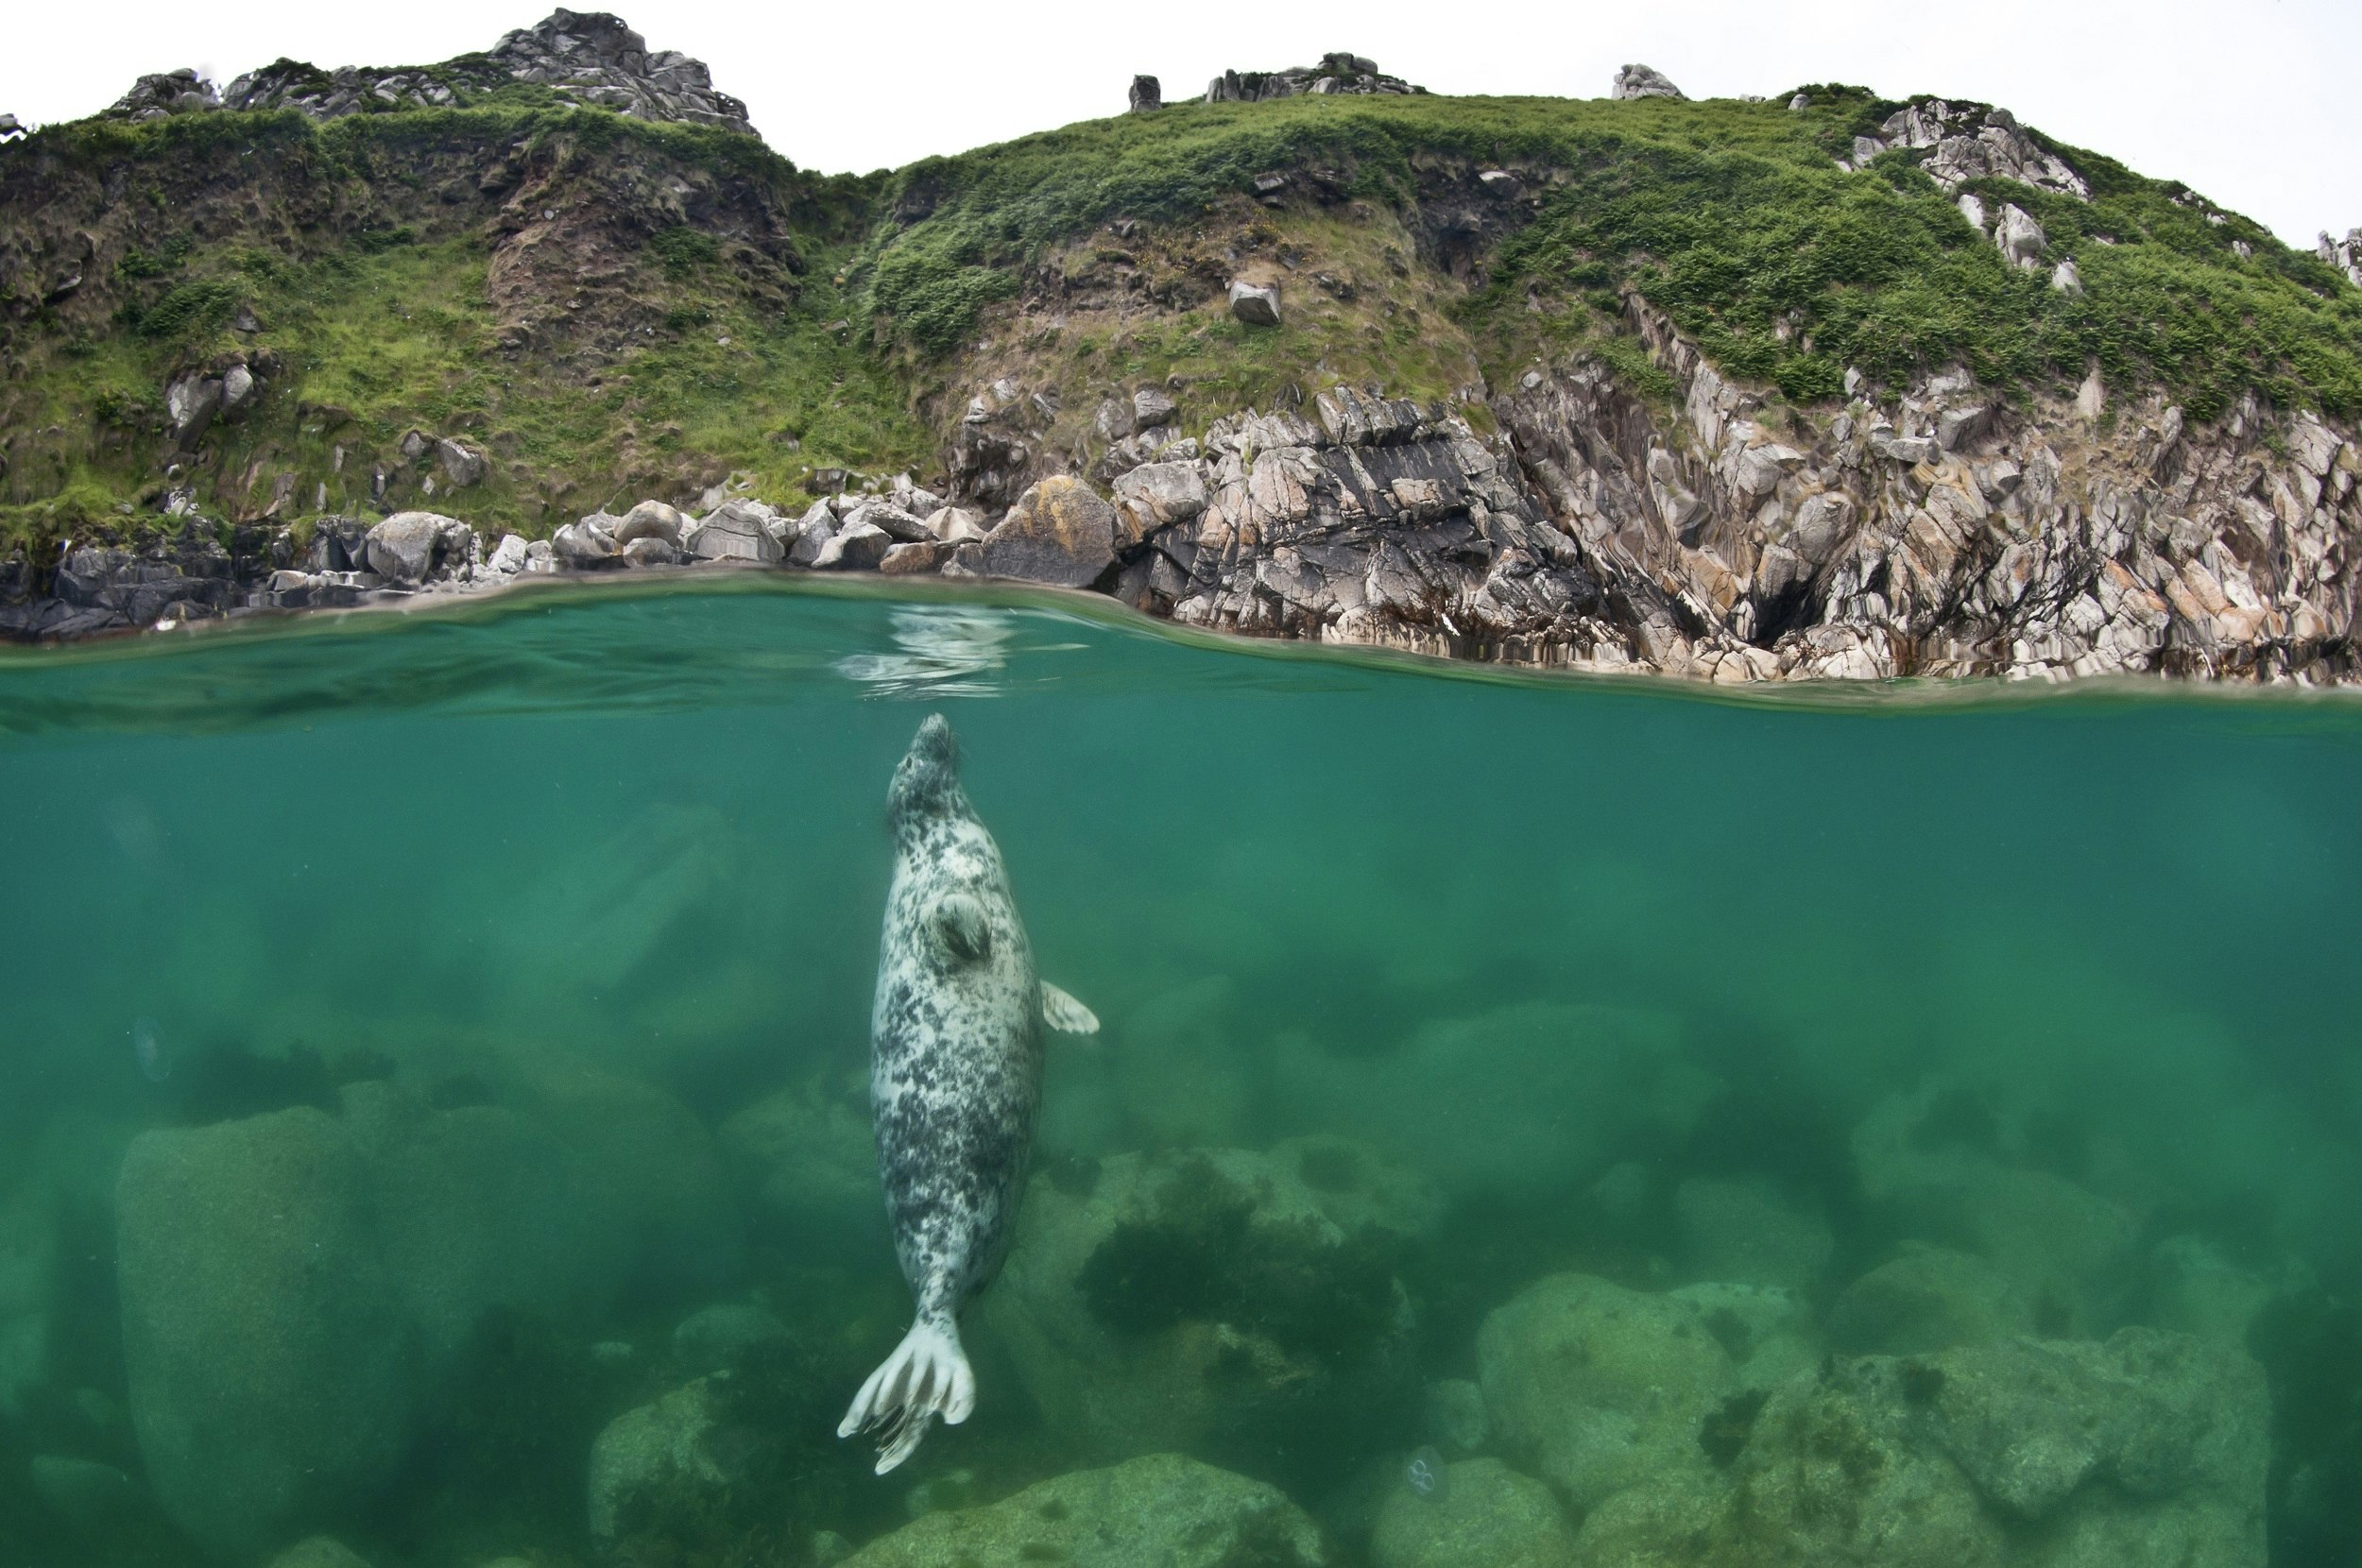 An underwater shot of a grey seal vertical heading towards the surface of the water. The rocky cliffs of Lundy Island can be seen above the surface